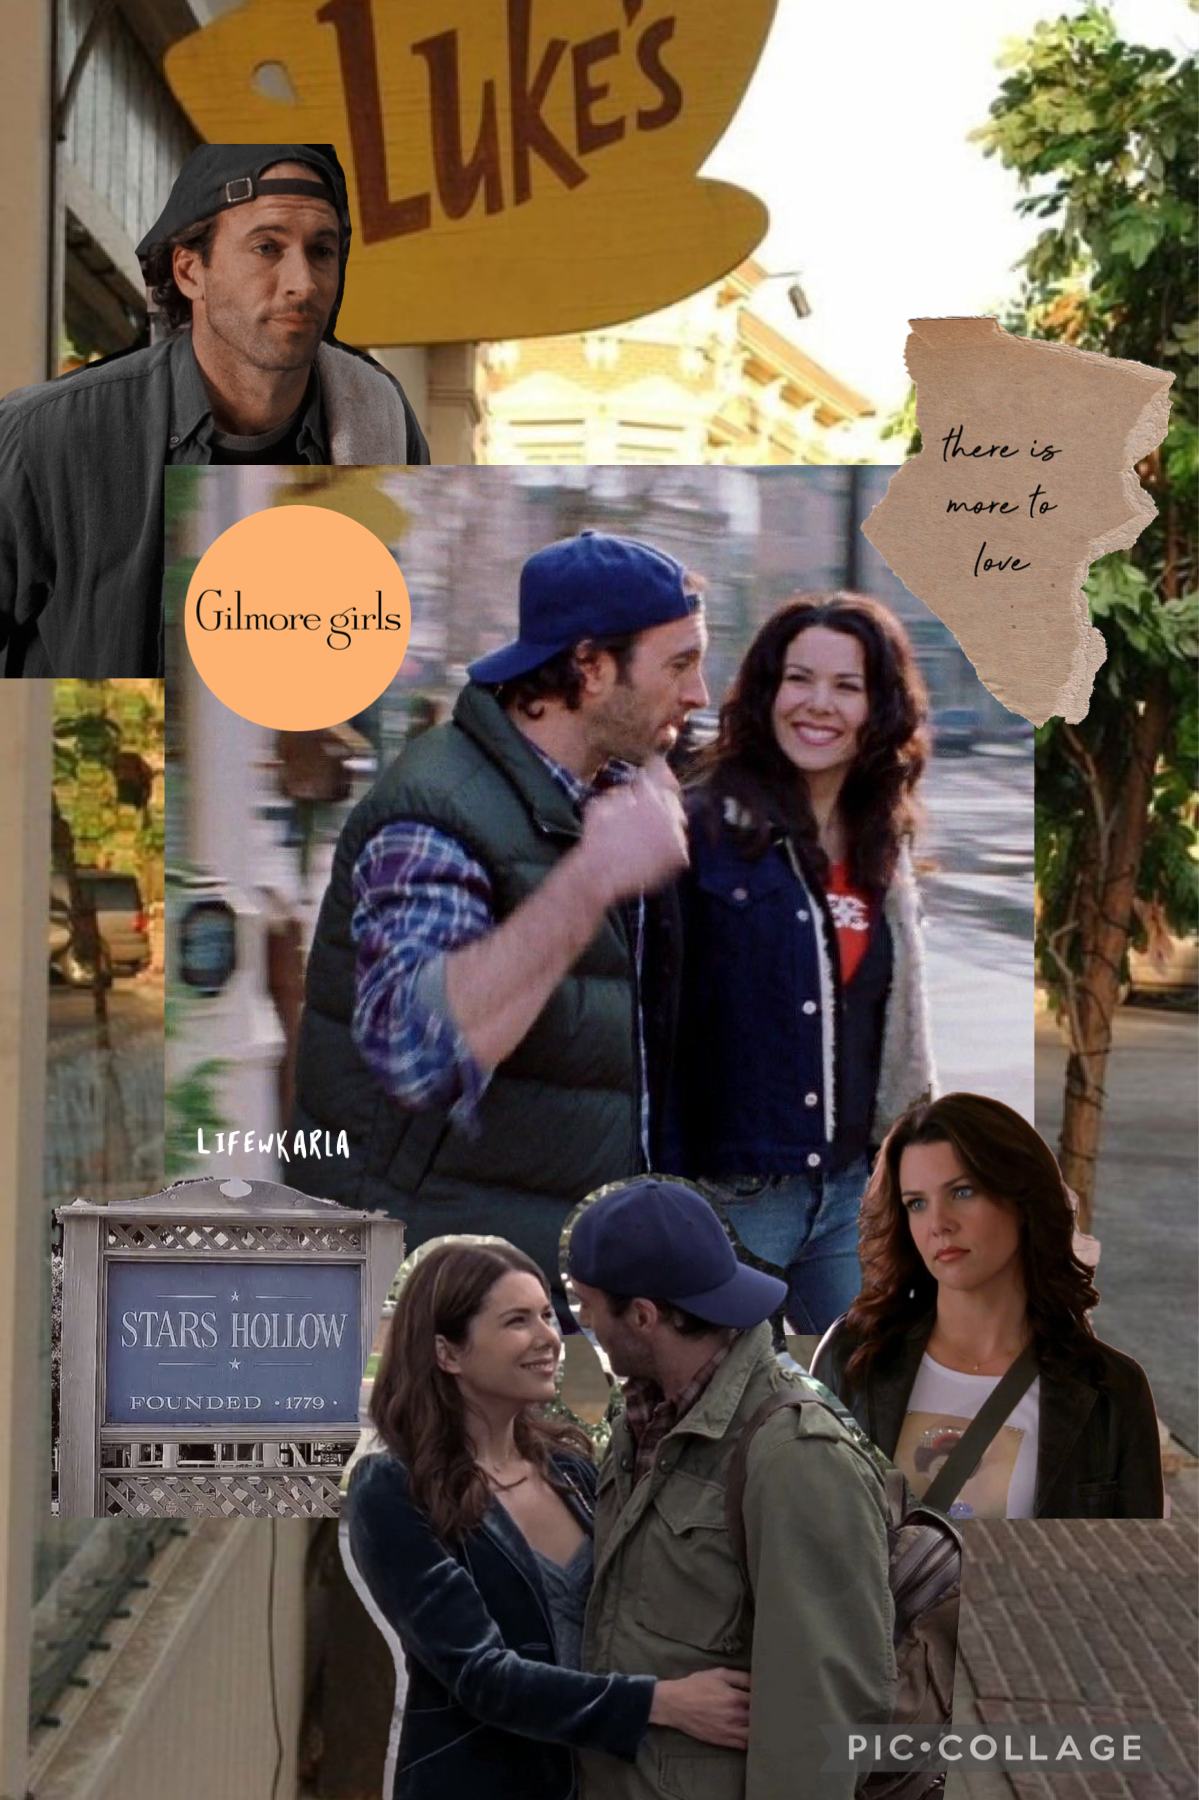 ☕️ Gilmore Girls Week ☕️
Starting with an OG ship 🥰❤️!!!!
QOTD: Who is your favorite gg character? 